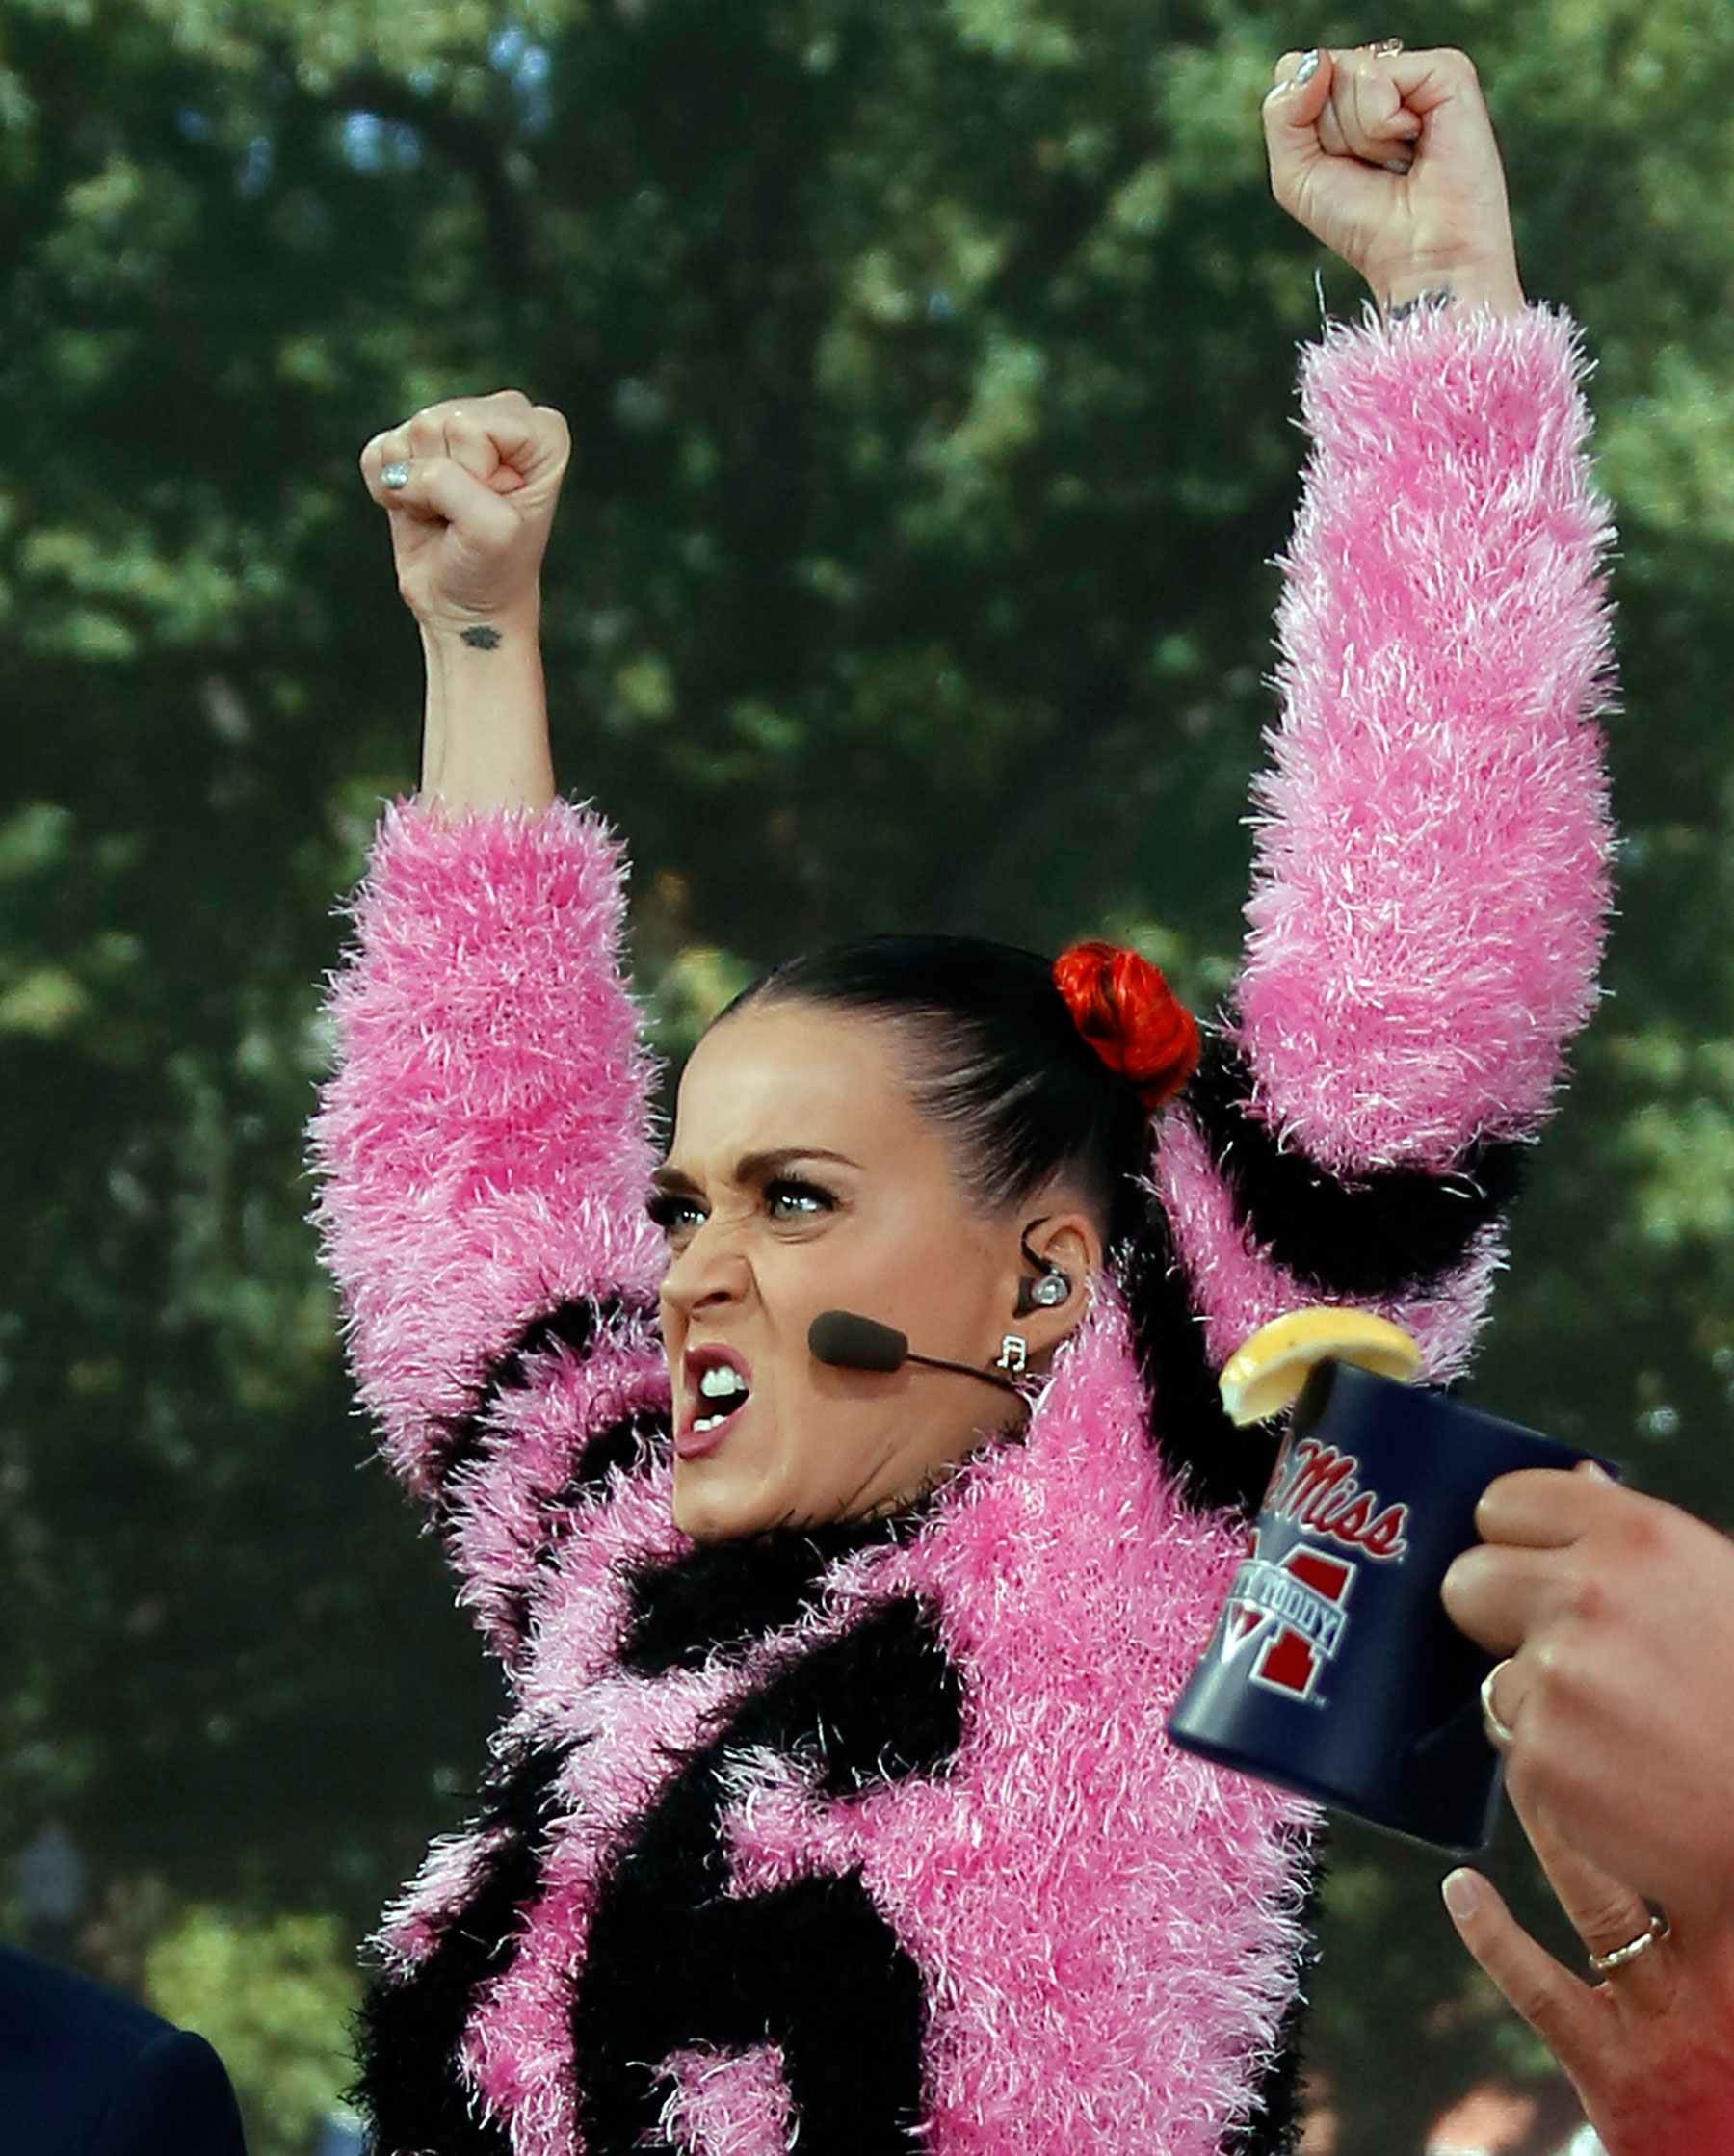 Report: Katy Perry to play Super Bowl halftime